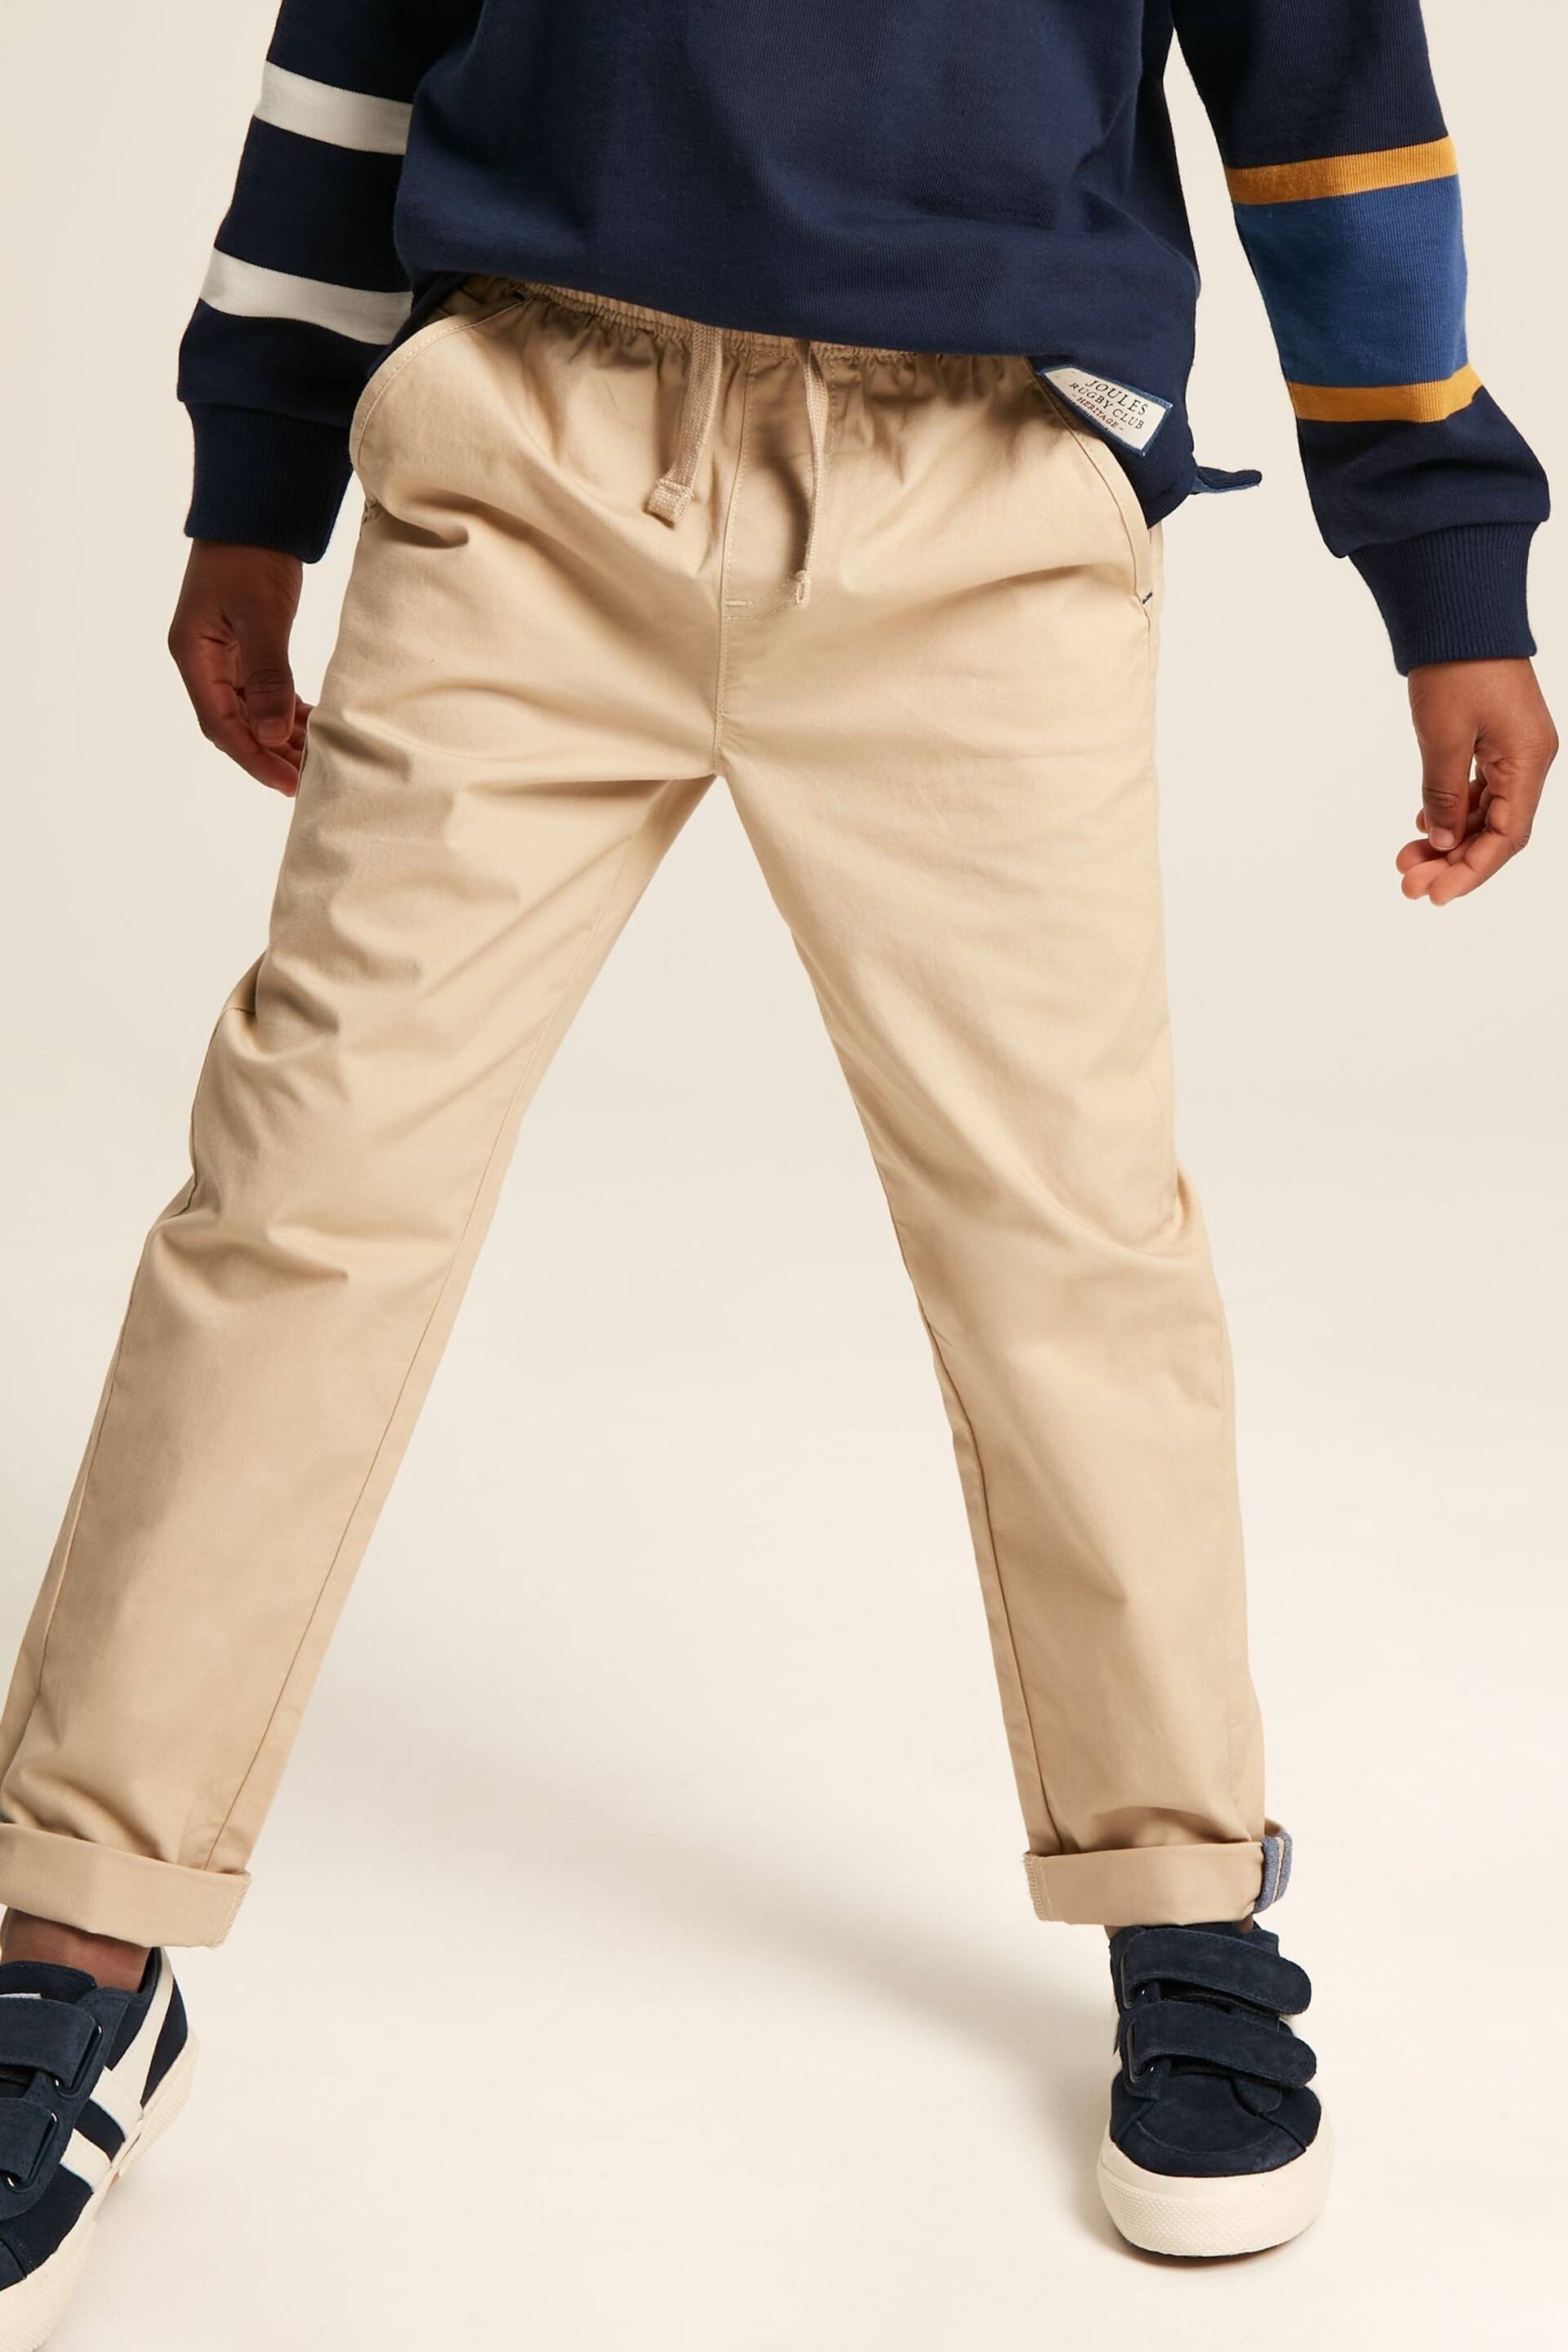 Joules Samson Stone Chino Trousers - Image 2 of 10